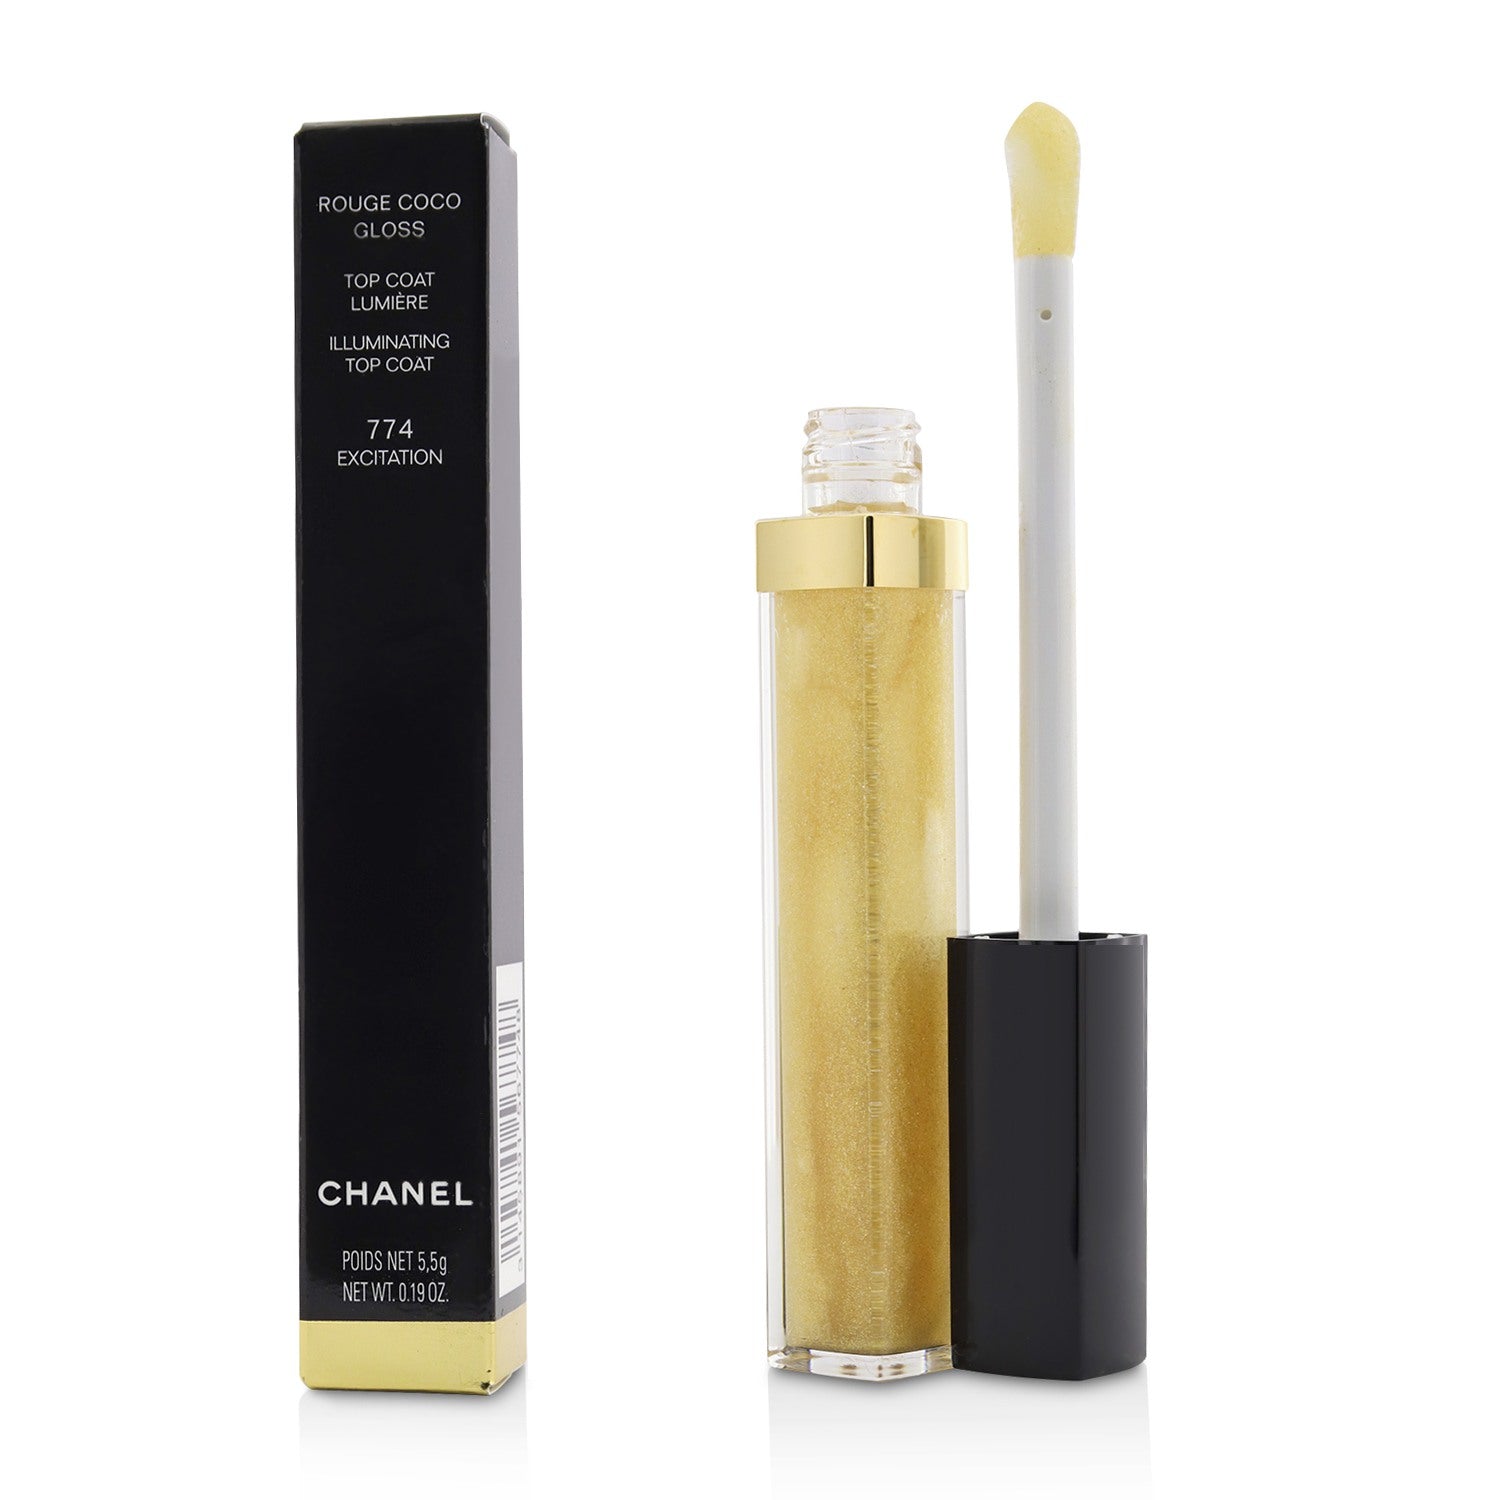 Chanel Rouge Coco Illuminating Top Coat - # 774 Excitation 5.5g/ Fresh Beauty Co. USA